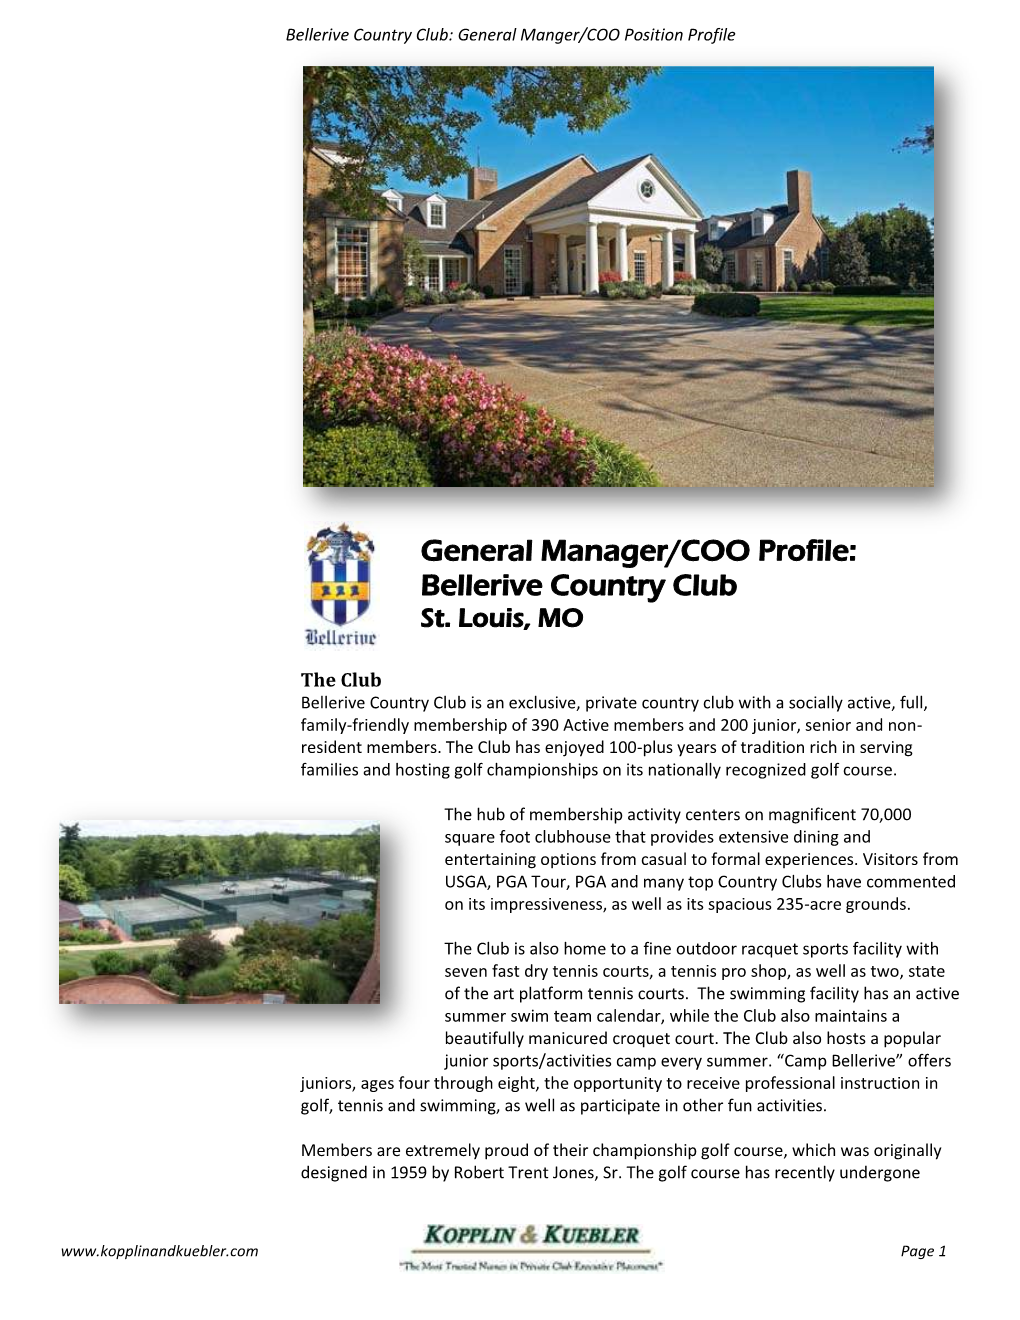 General Manager/COO Profile: Bellerive Country Club St